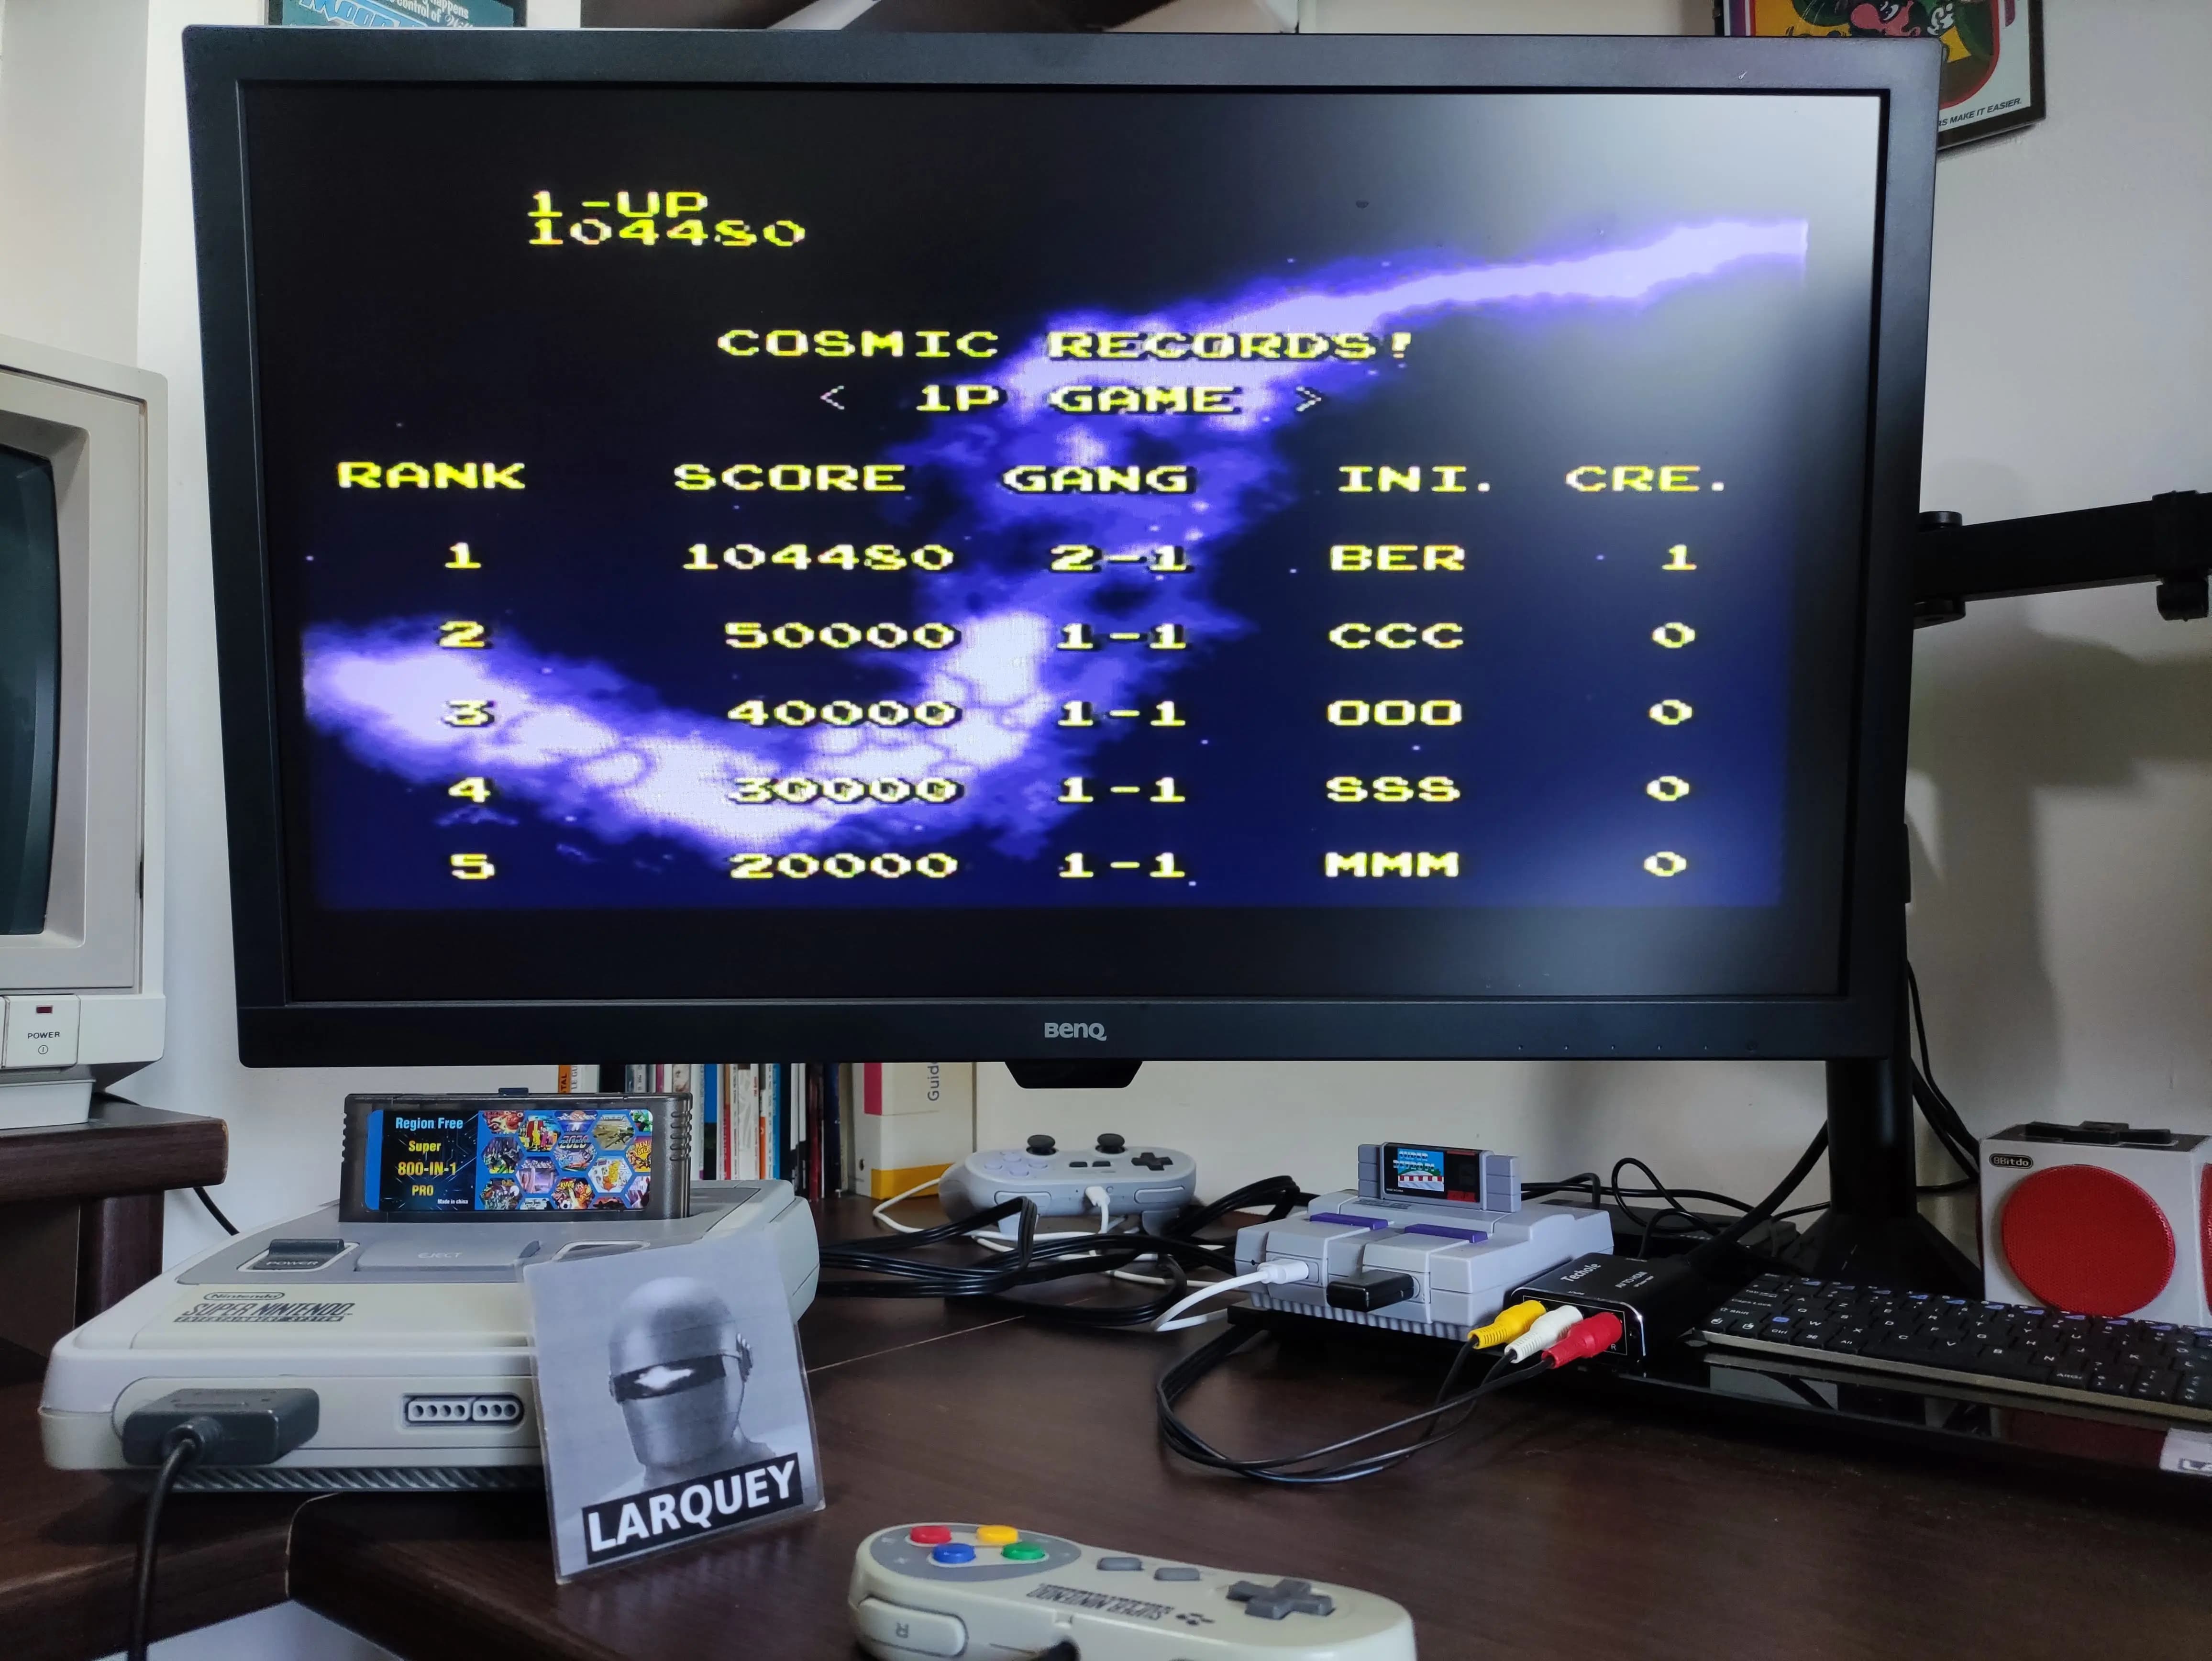 Larquey: Cosmo Gang: The Video [Extra Hard] (SNES/Super Famicom) 104,480 points on 2022-07-16 01:12:49